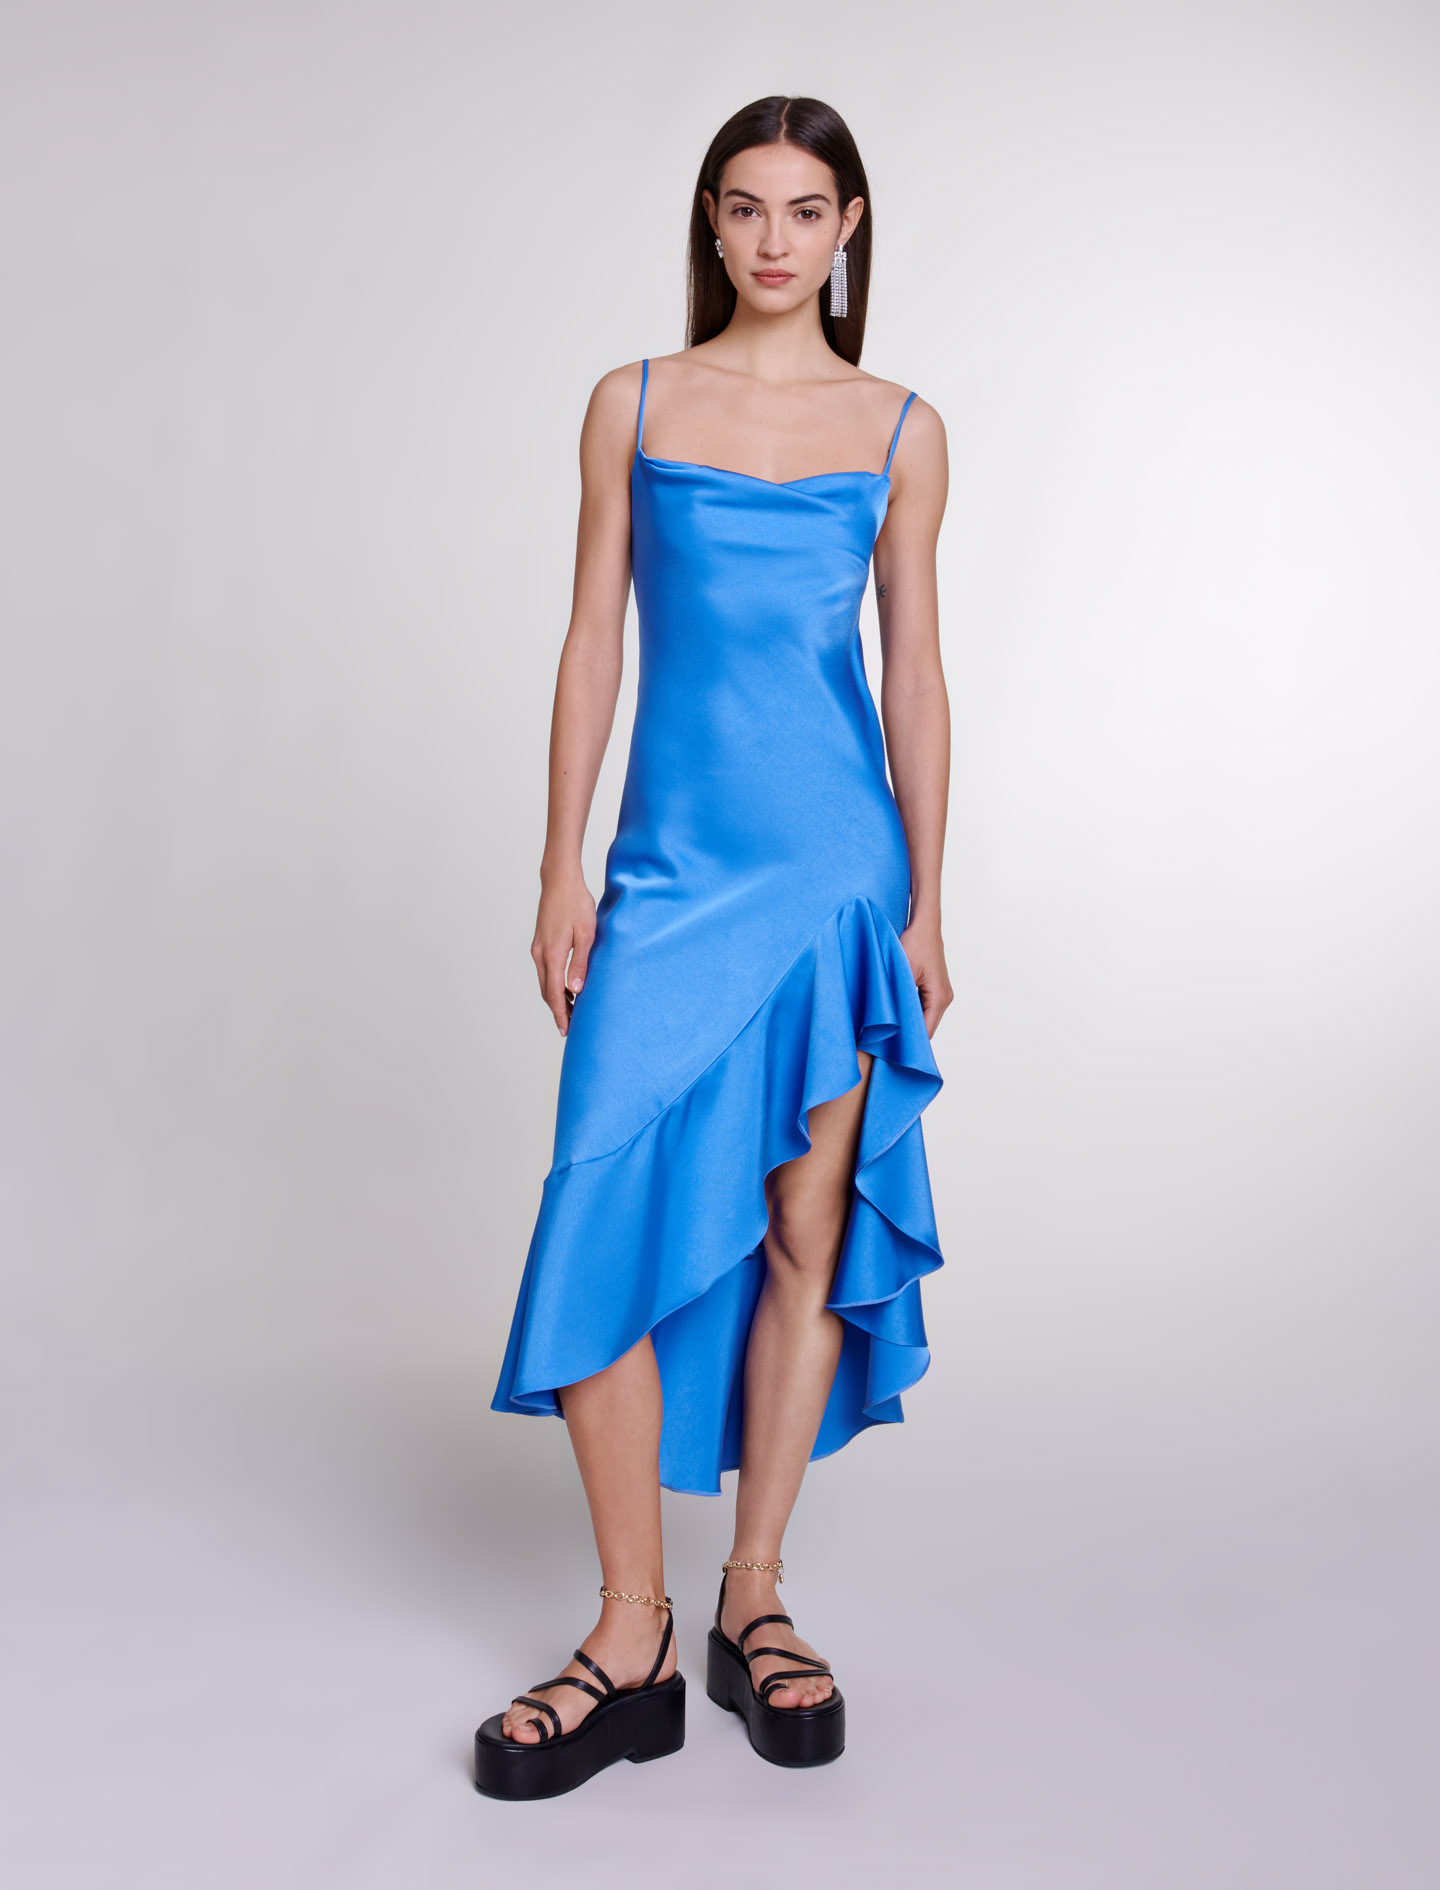 Maje Woman's polyester Asymmetric satin-effect maxi dress for Spring/Summer, in color Blue / Blue